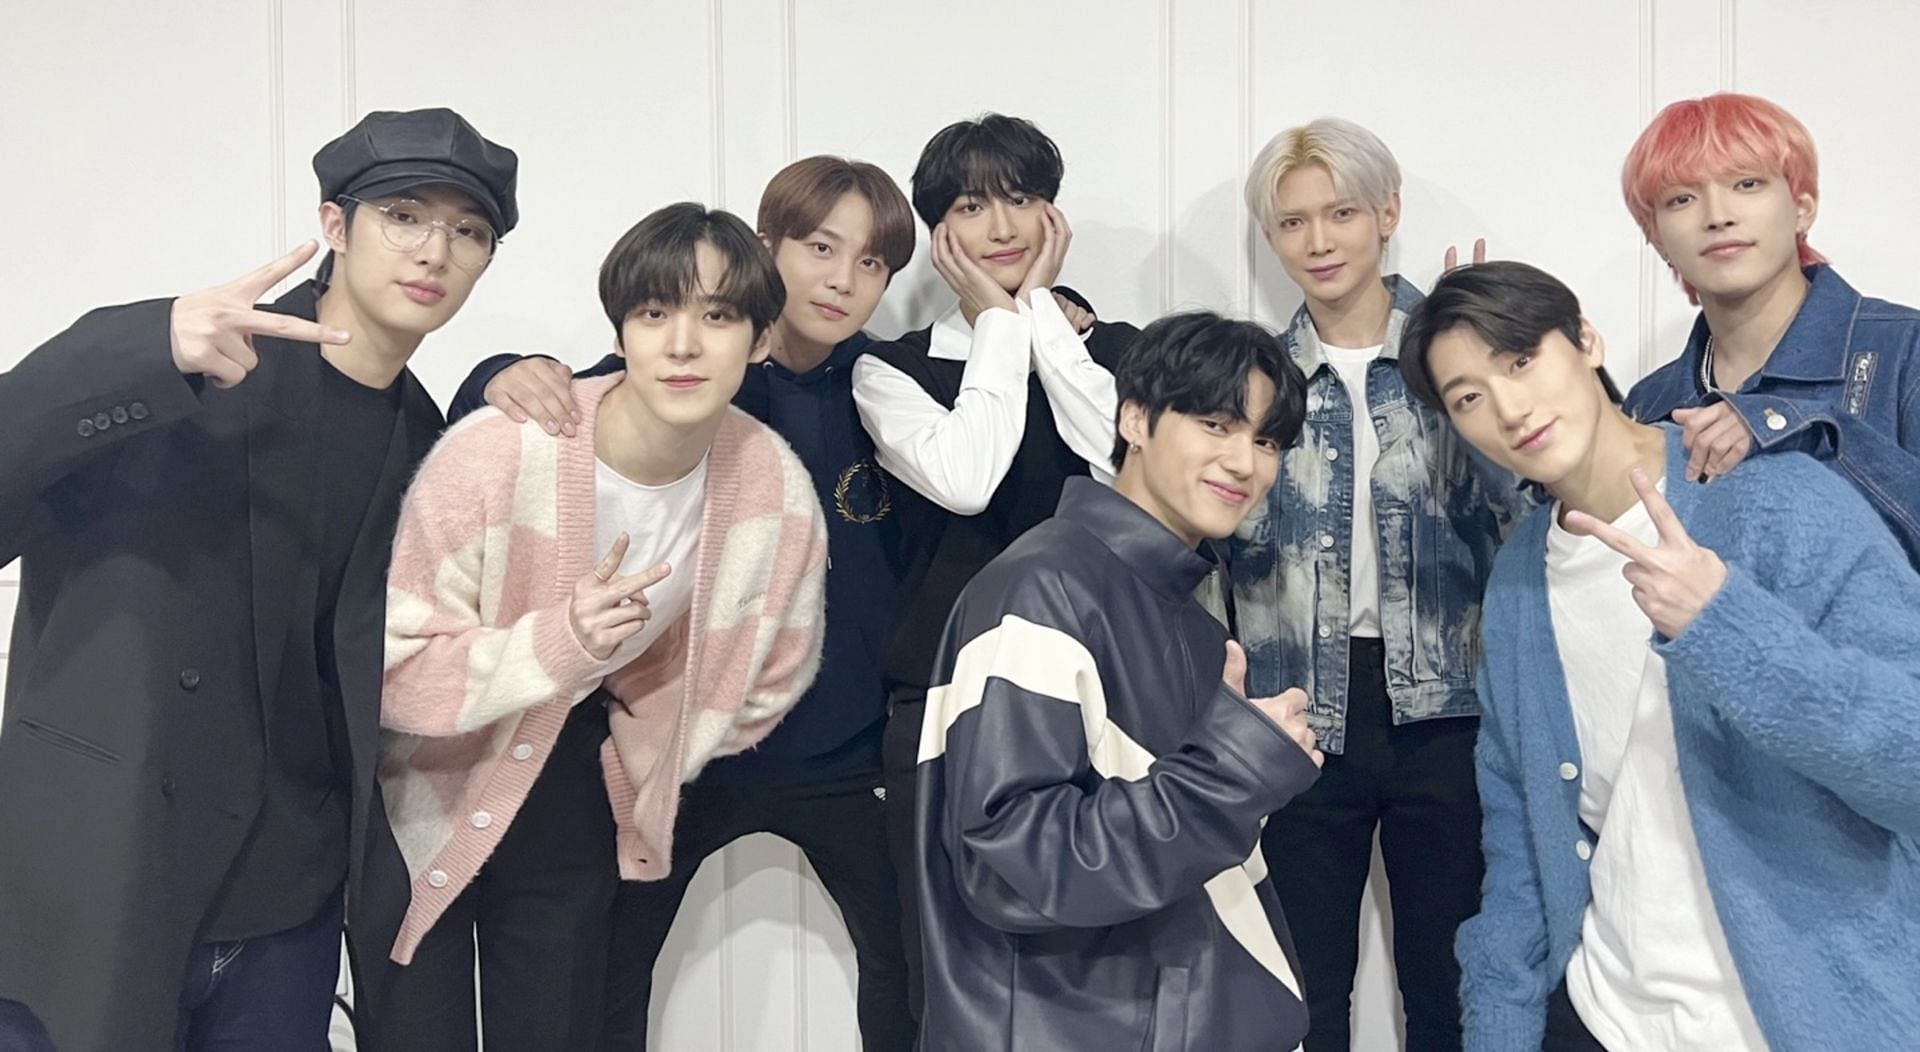 A still of the K-pop group (Image via @ATEEZofficial/Twitter)